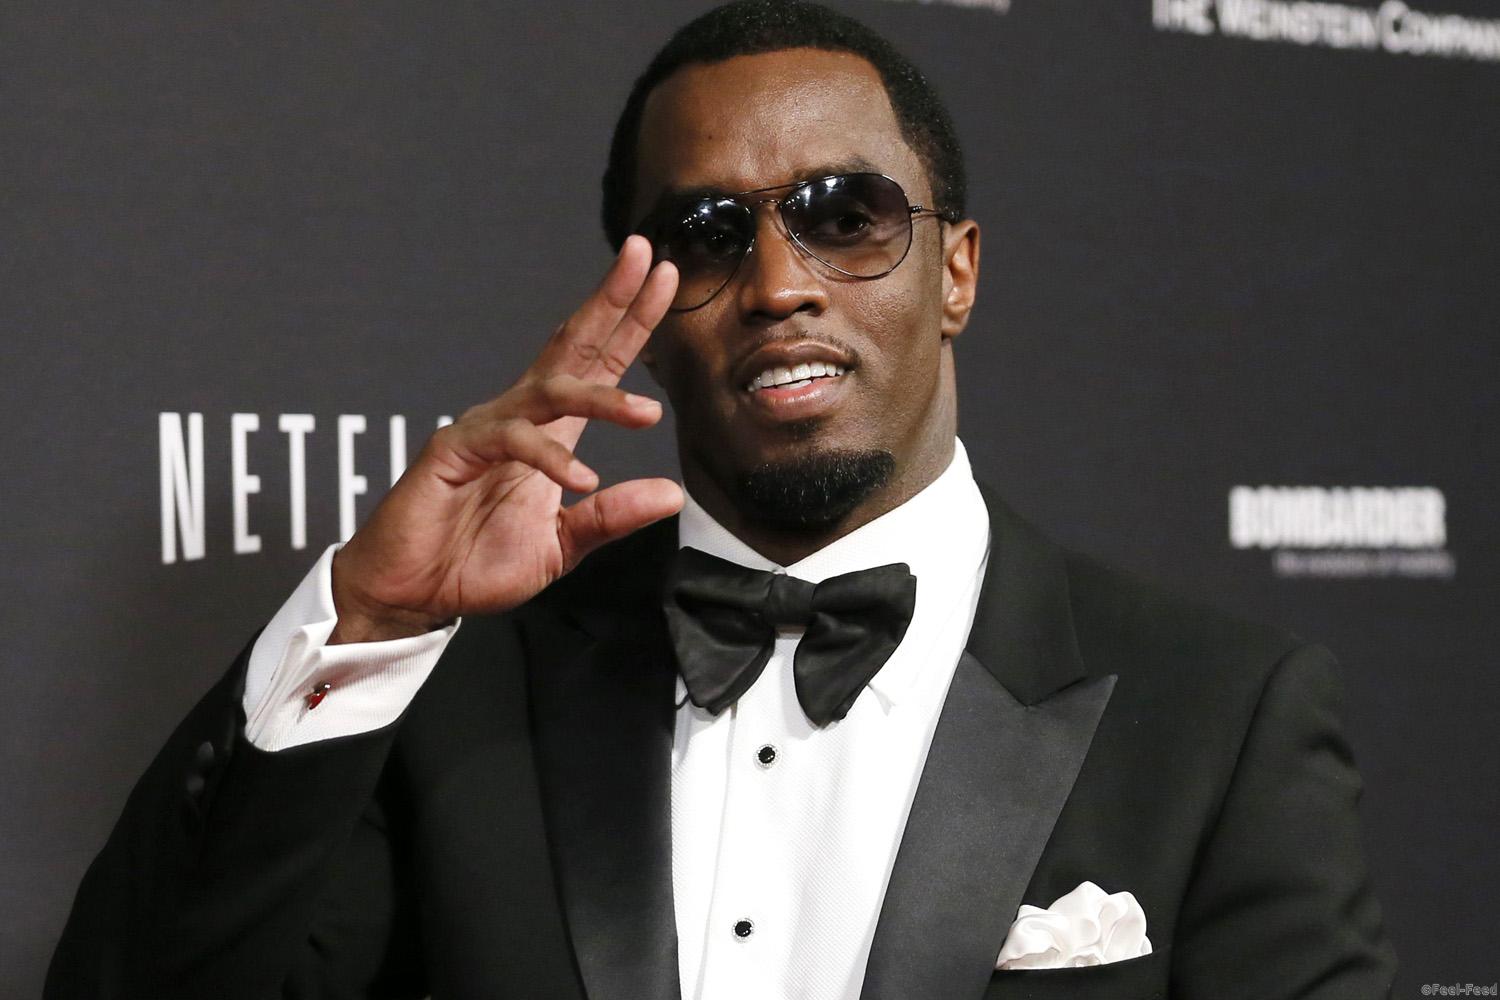 Sean "Diddy" Combs arrives at The Weinstein Company & Netflix after party after the 71st annual Golden Globe Awards in Beverly Hills, California, January 12, 2014. REUTERS/Danny Moloshok (UNITED STATES - Tags: Entertainment)(GOLDENGLOBES-PARTIES)